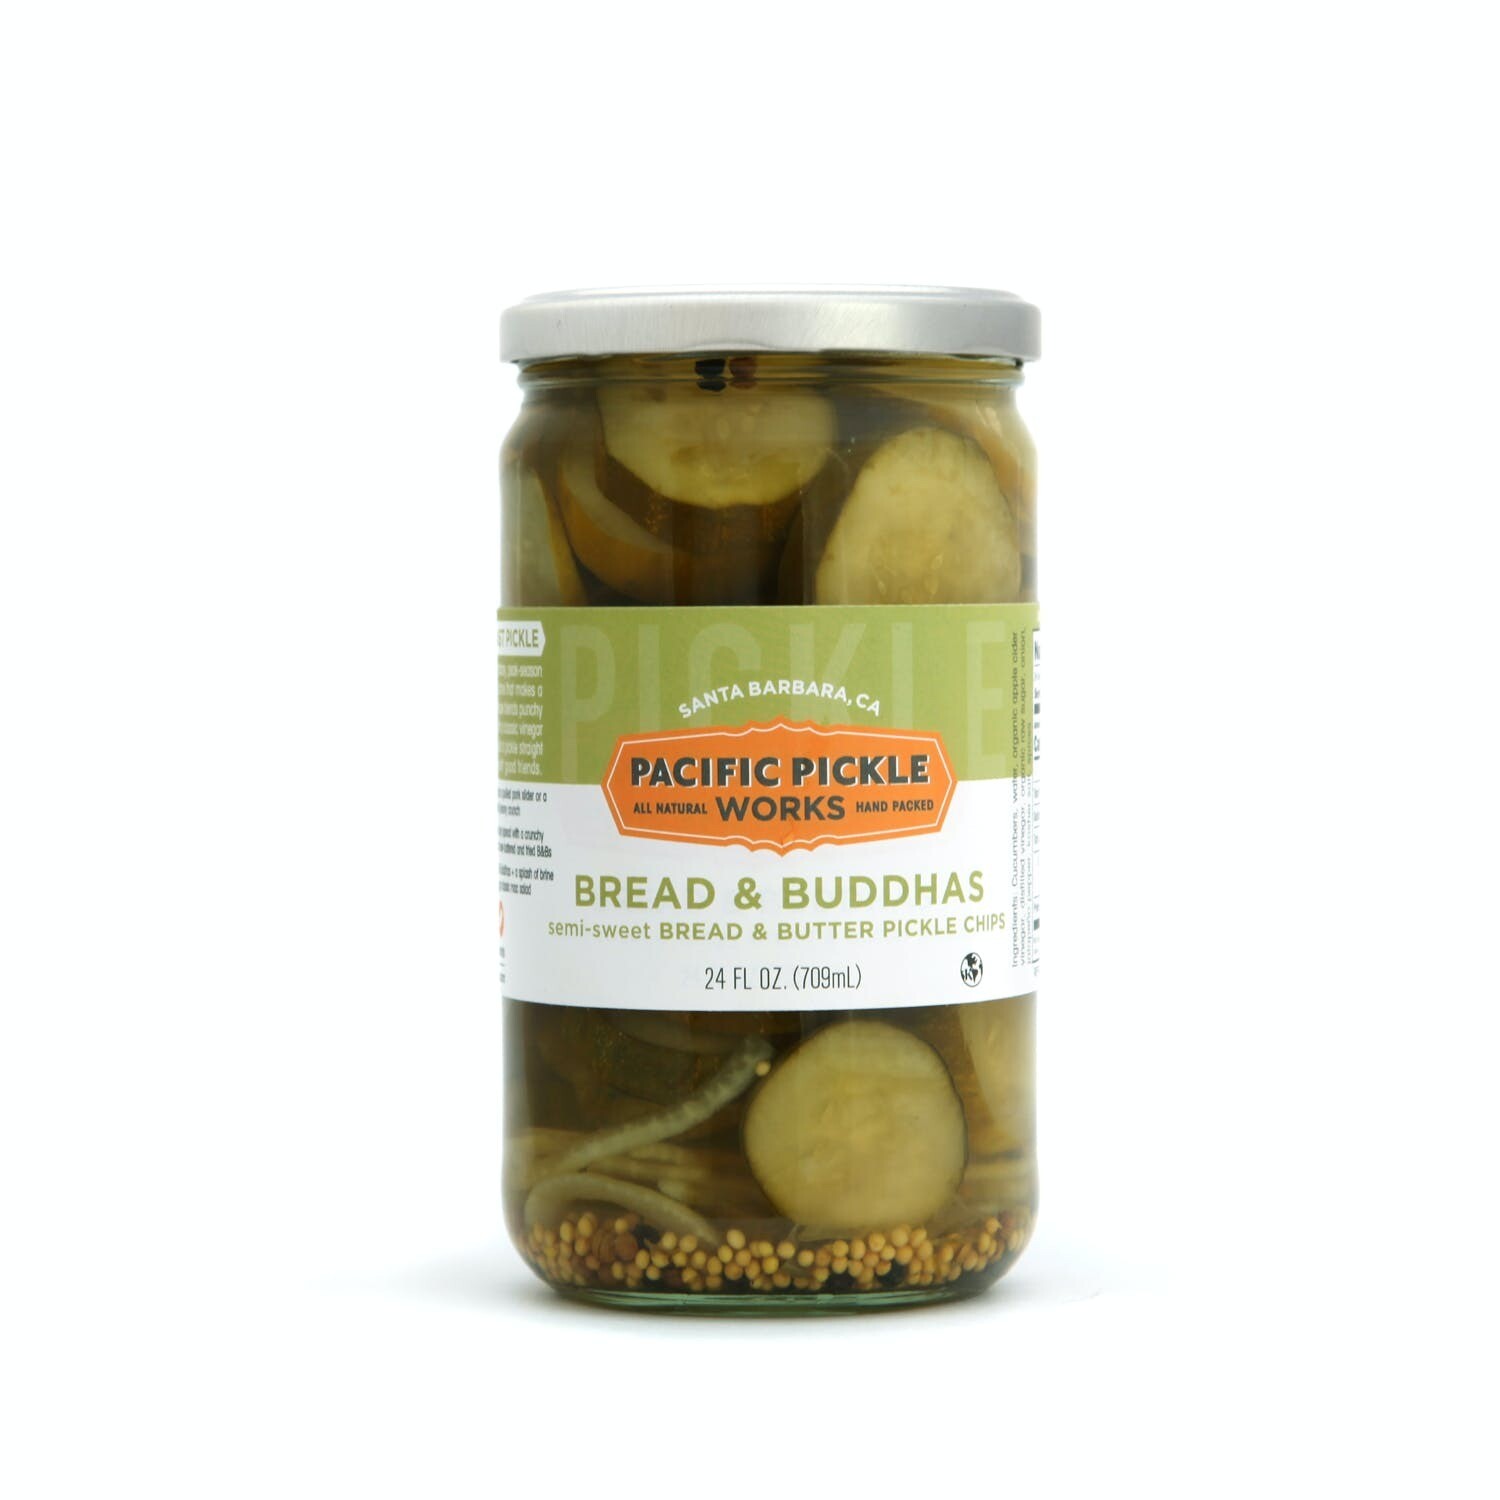 Pacific Pickle Works Bread & Buddhas